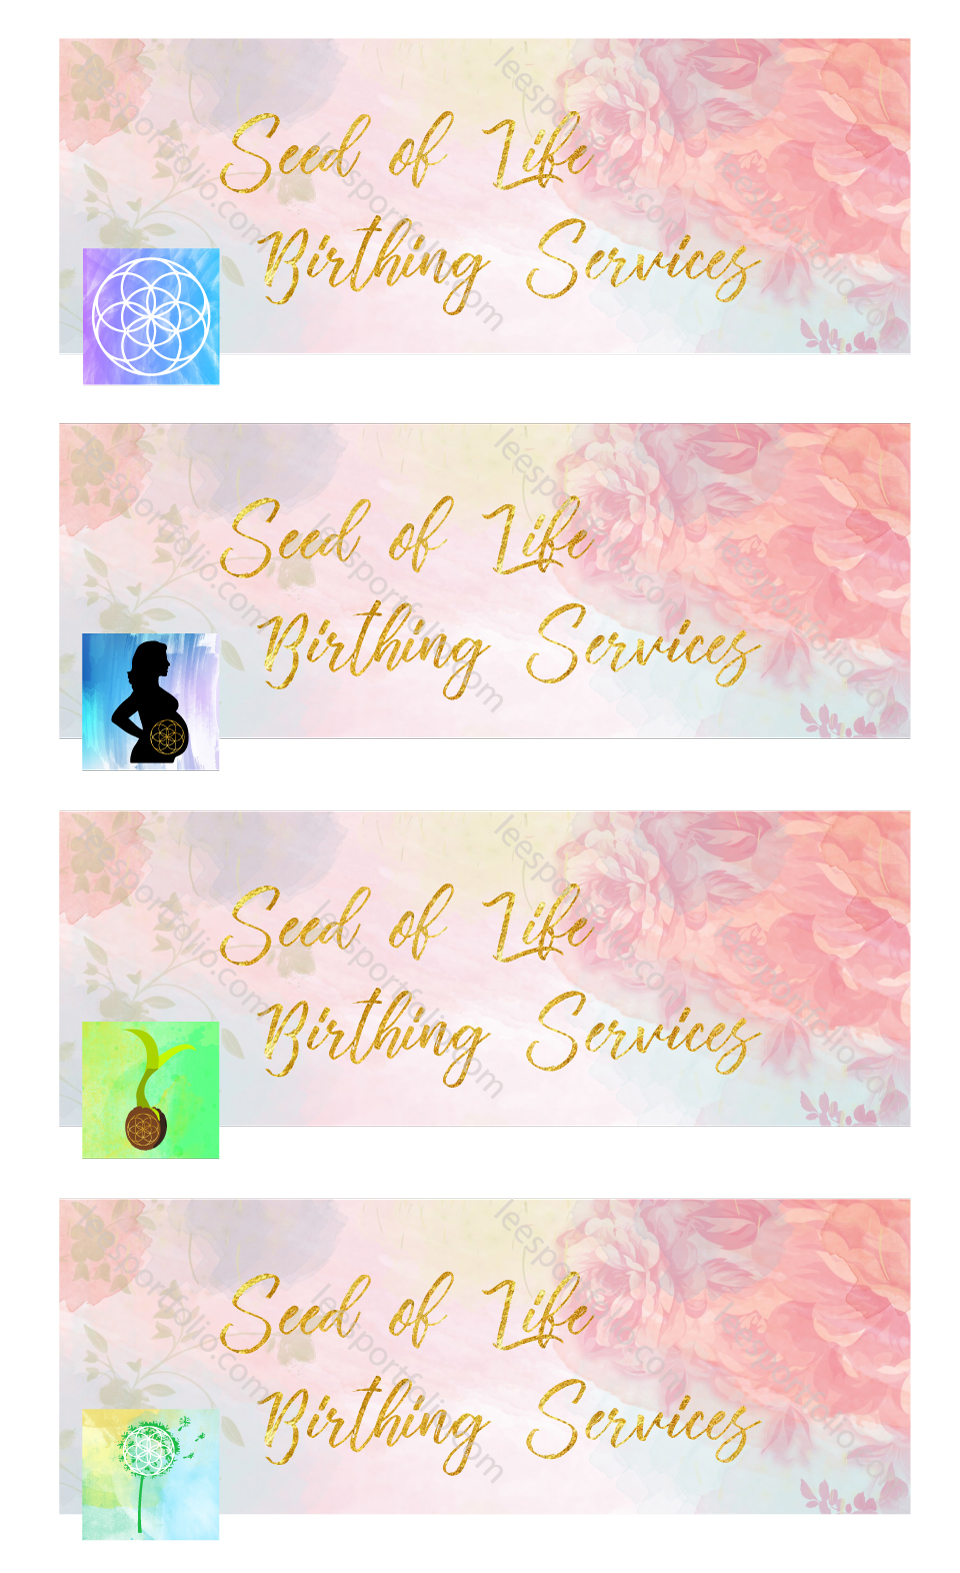 Seed of Life Birthing Services